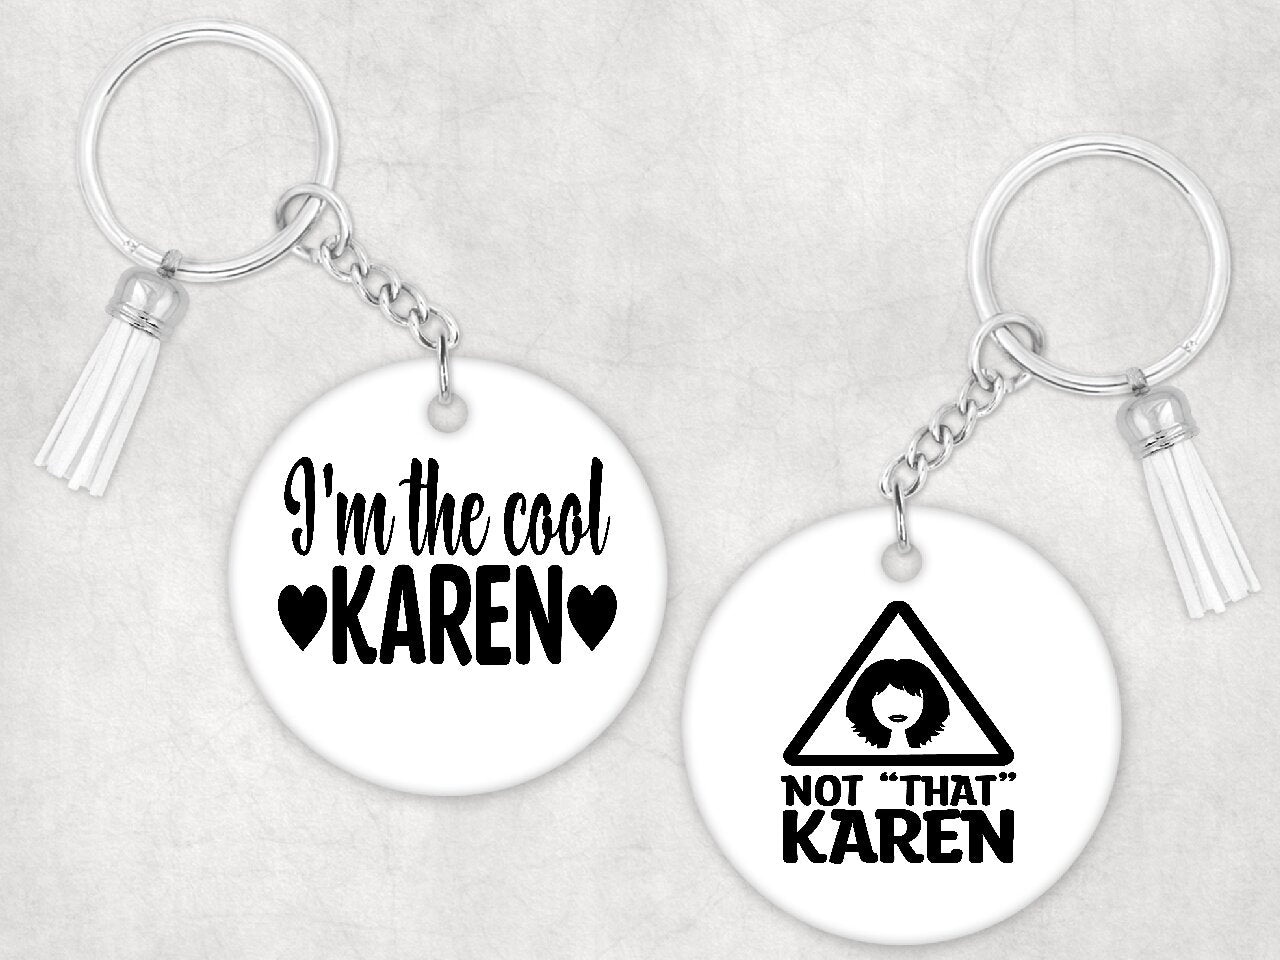 The Karen Collection - Key Chains